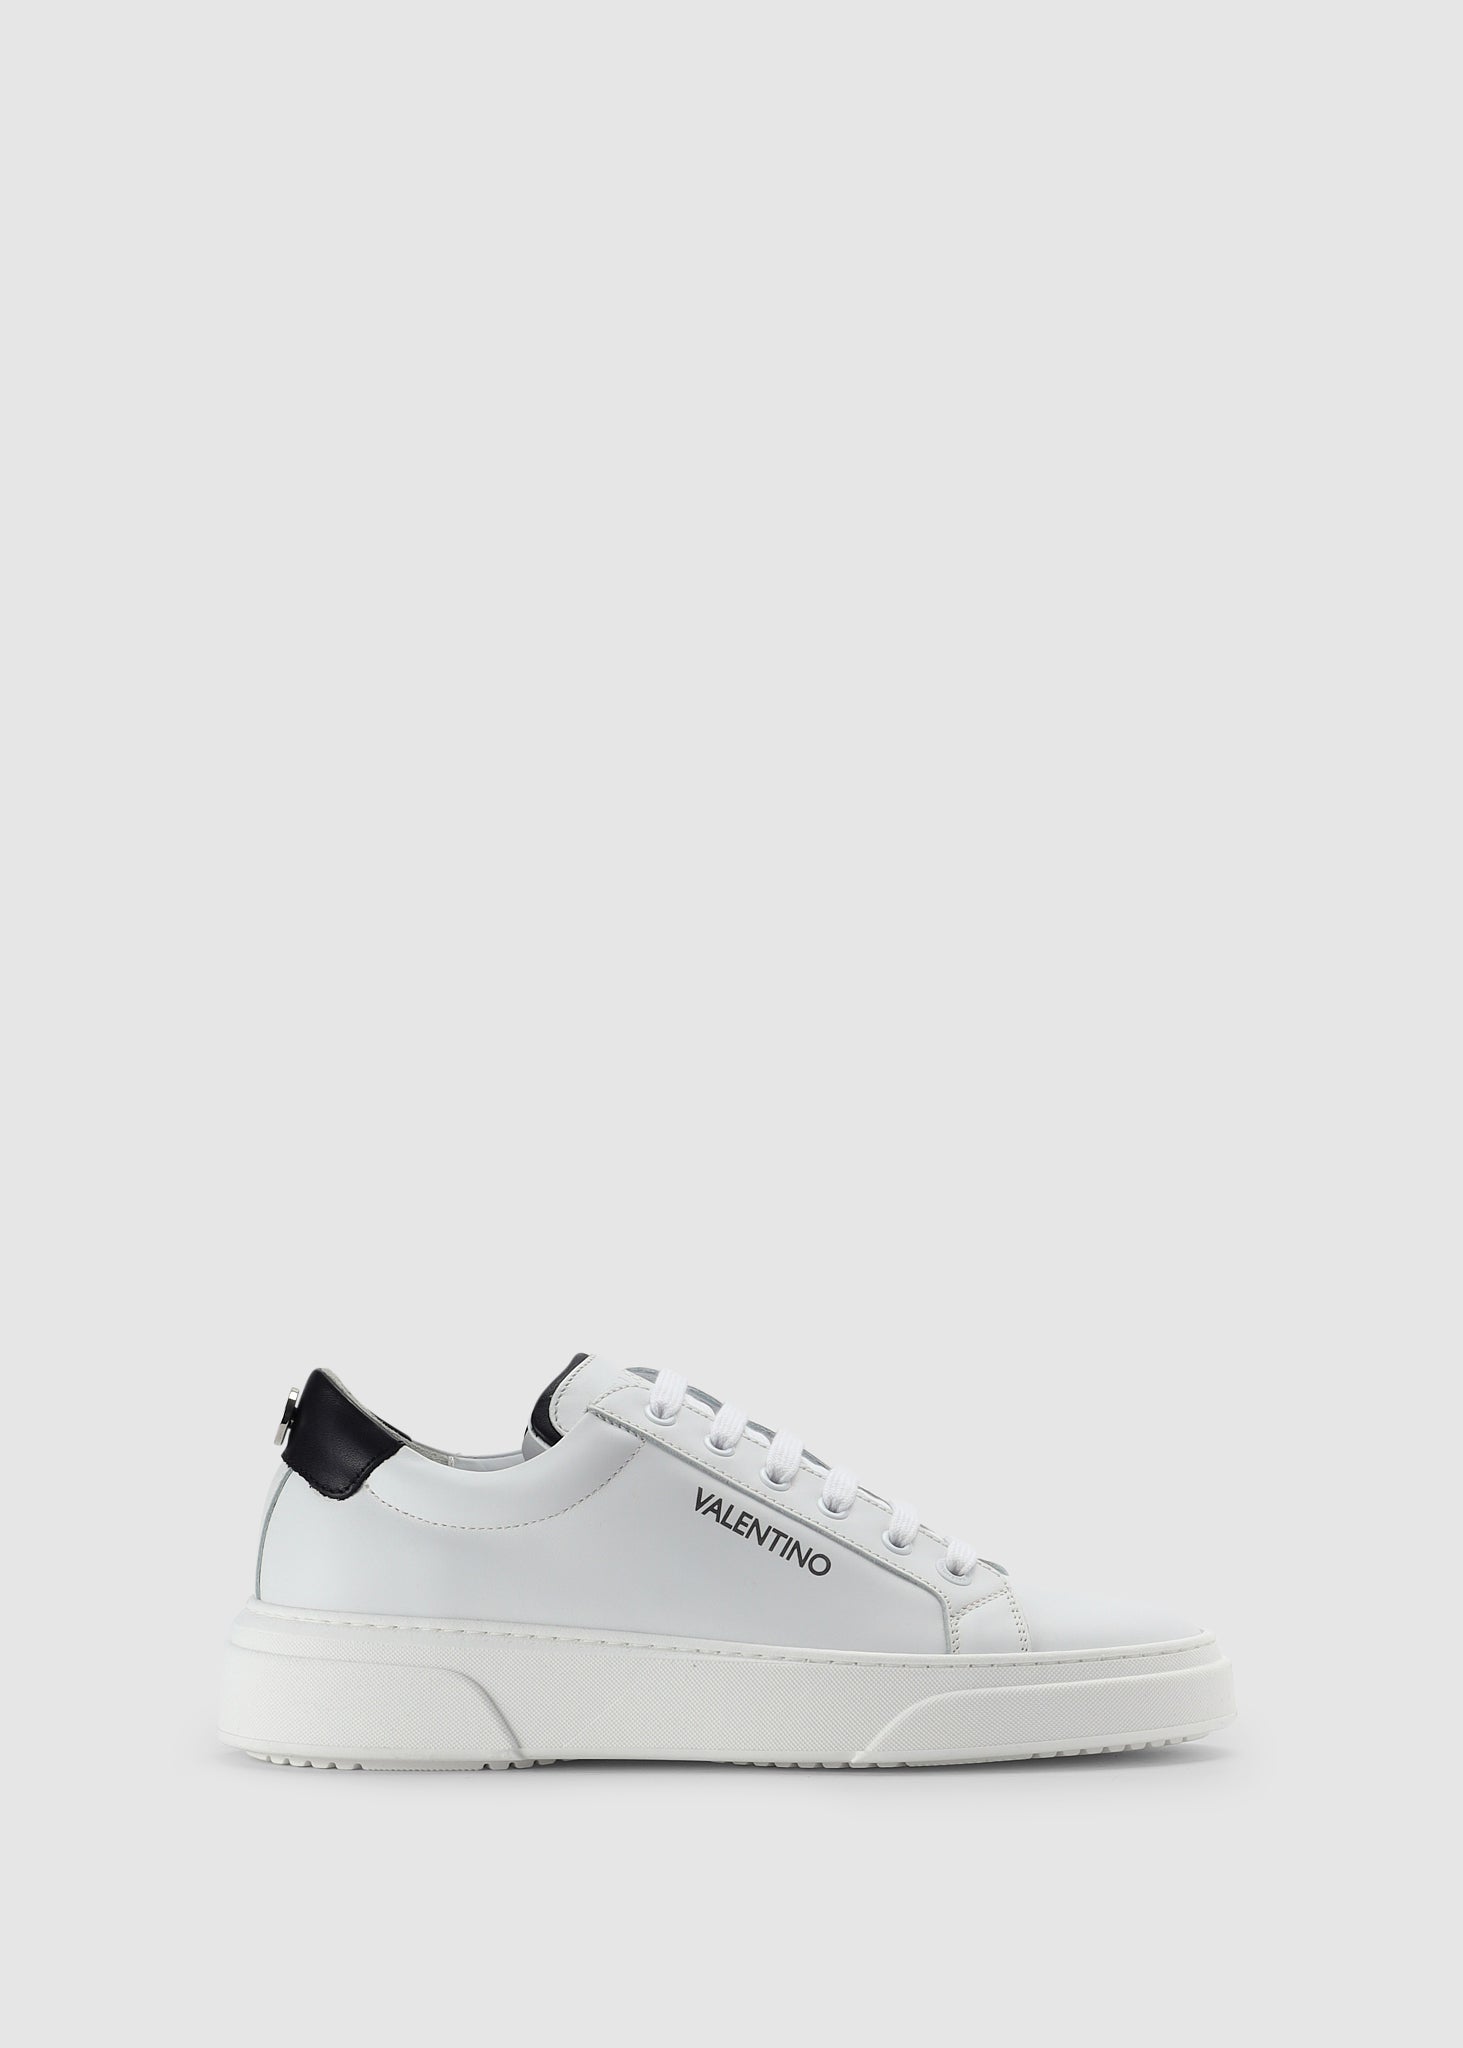 Valentino Shoes Mens Stan Summer Lace Up Trainers